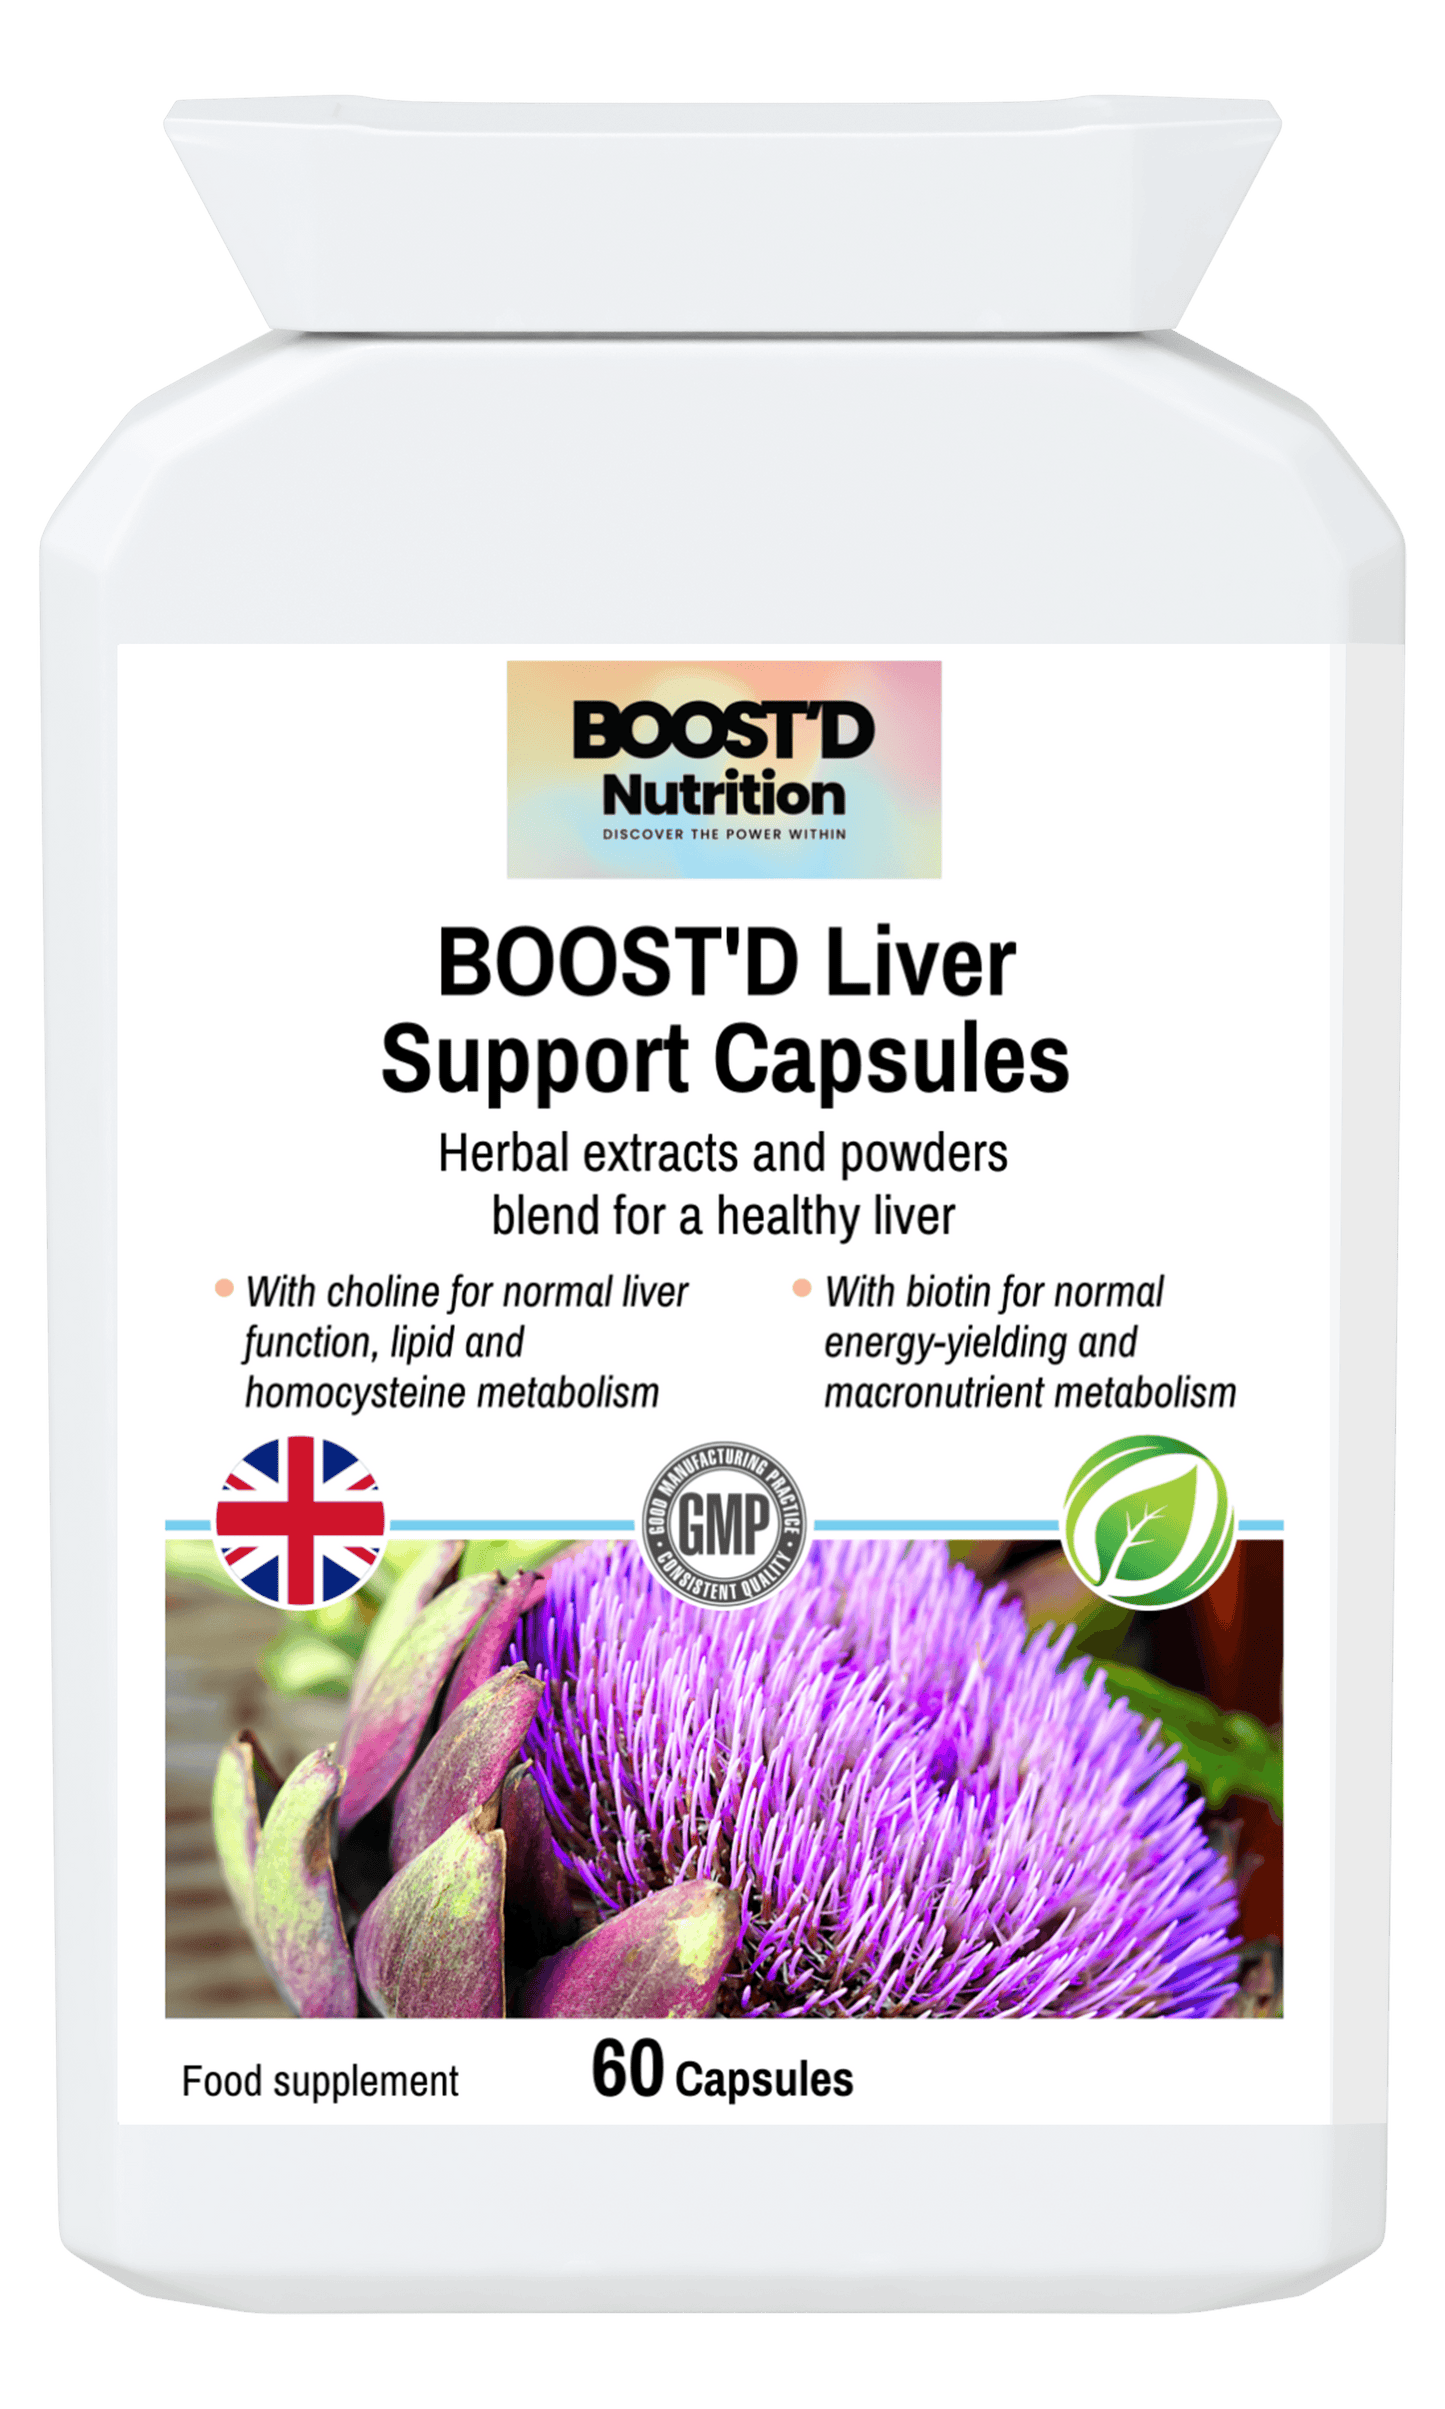 BOOST'D Liver Support Capsules (60) - BOOSTD Nutrition -